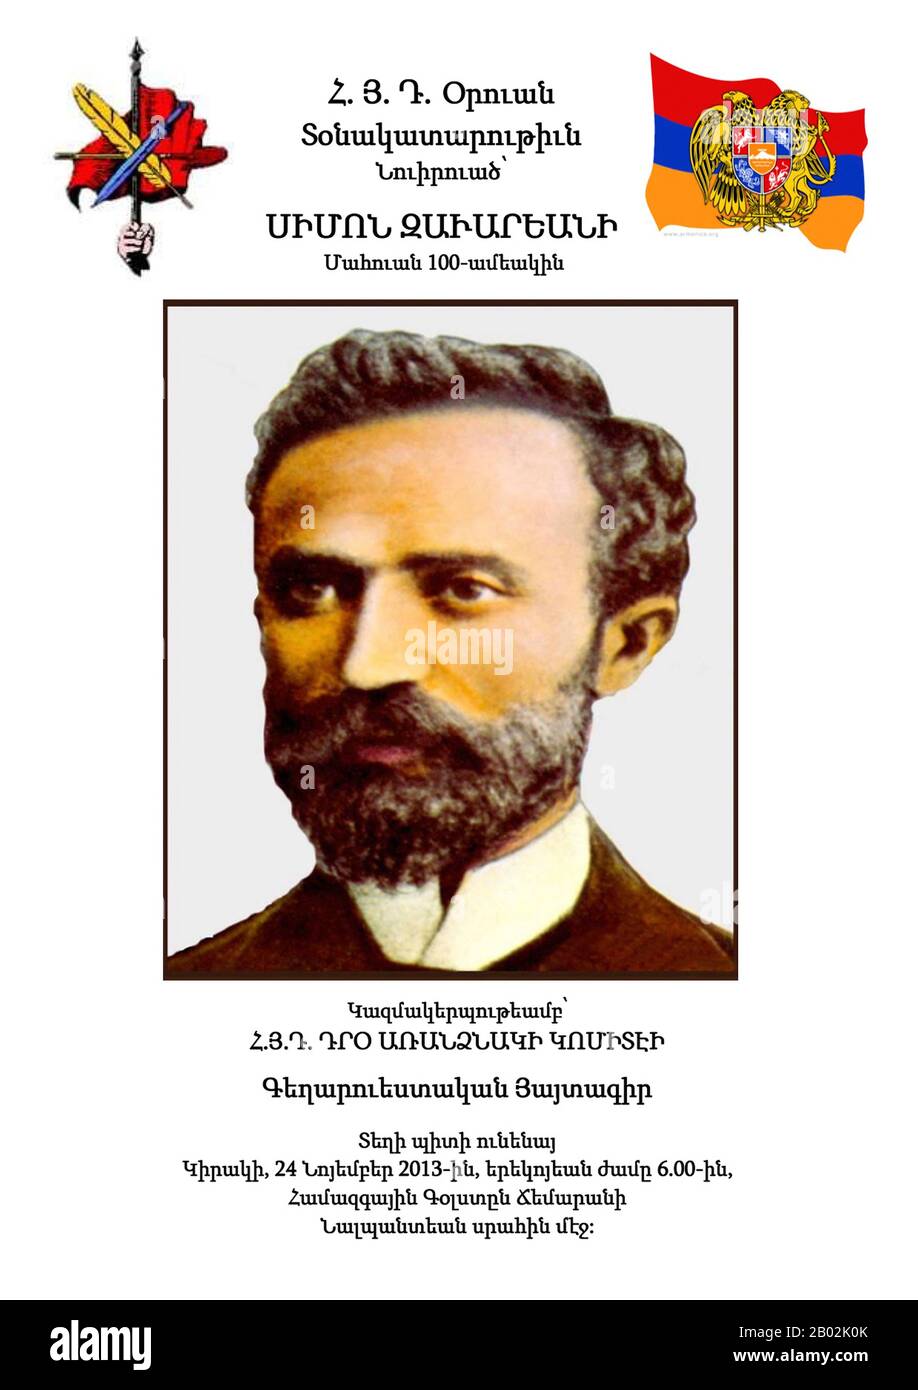 Simon Zavarian, (Armenian:Սիմոն Զաւարեան) also known by his nom de guerre Anton (Անտոն), (1866–1913) was one of the three founders of the Armenian Revolutionary Federation and part of Armenian national liberation movement, along Kristapor Mikaelian and Stepan Zorian.  Zavarian was born in Aygehat, Lori. Growing up, he attended college in Moscow, later settling in Tiflis, where he met Kristapor Mikaelian and Stepan Zorian. They co-founded the Armenian Revolutionary Federation (ARF) in 1890.  This political party gained public support by demanding reforms and taking up arms to defend Armenian ci Stock Photo